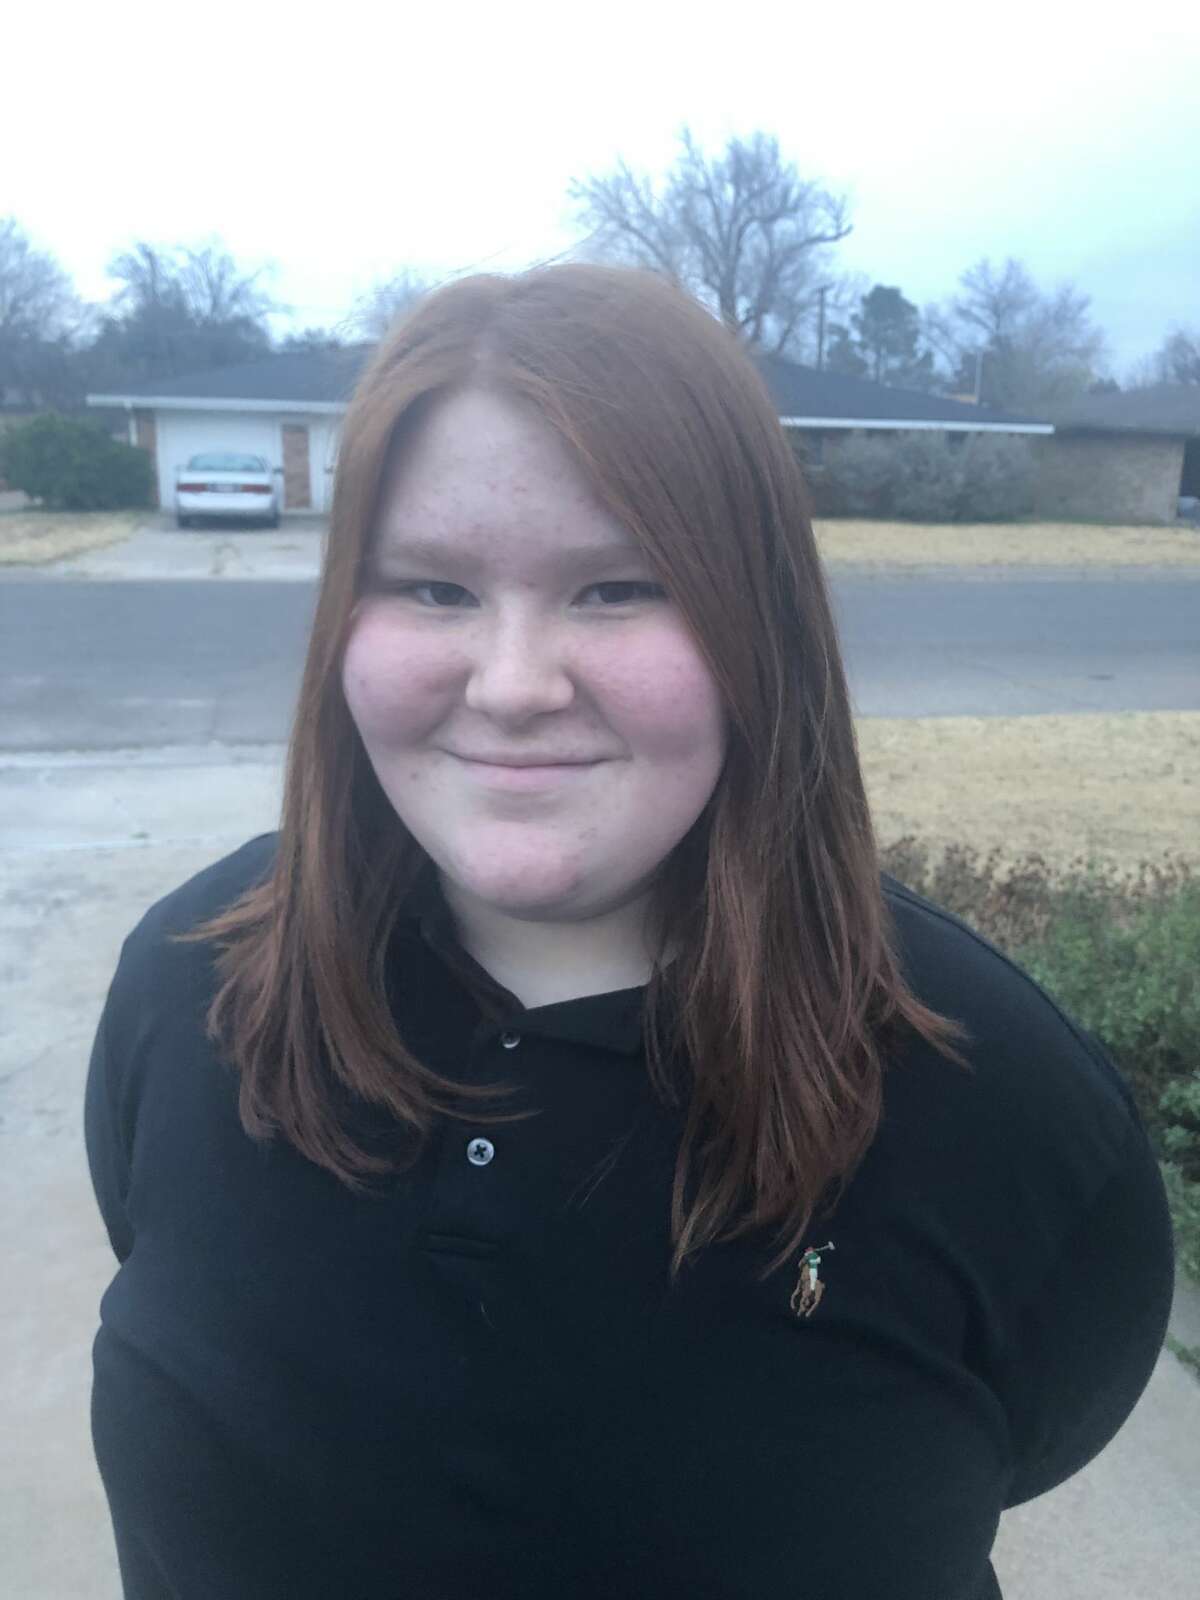 When seventh-grader Dash Hutt wanted her choir to perform for veterans at a Big Spring nursing home, she started a fundraising campaign to cover transportation costs. The San Jacinto Junior High School student reached her goal of collecting $3,000 to go toward the trip.